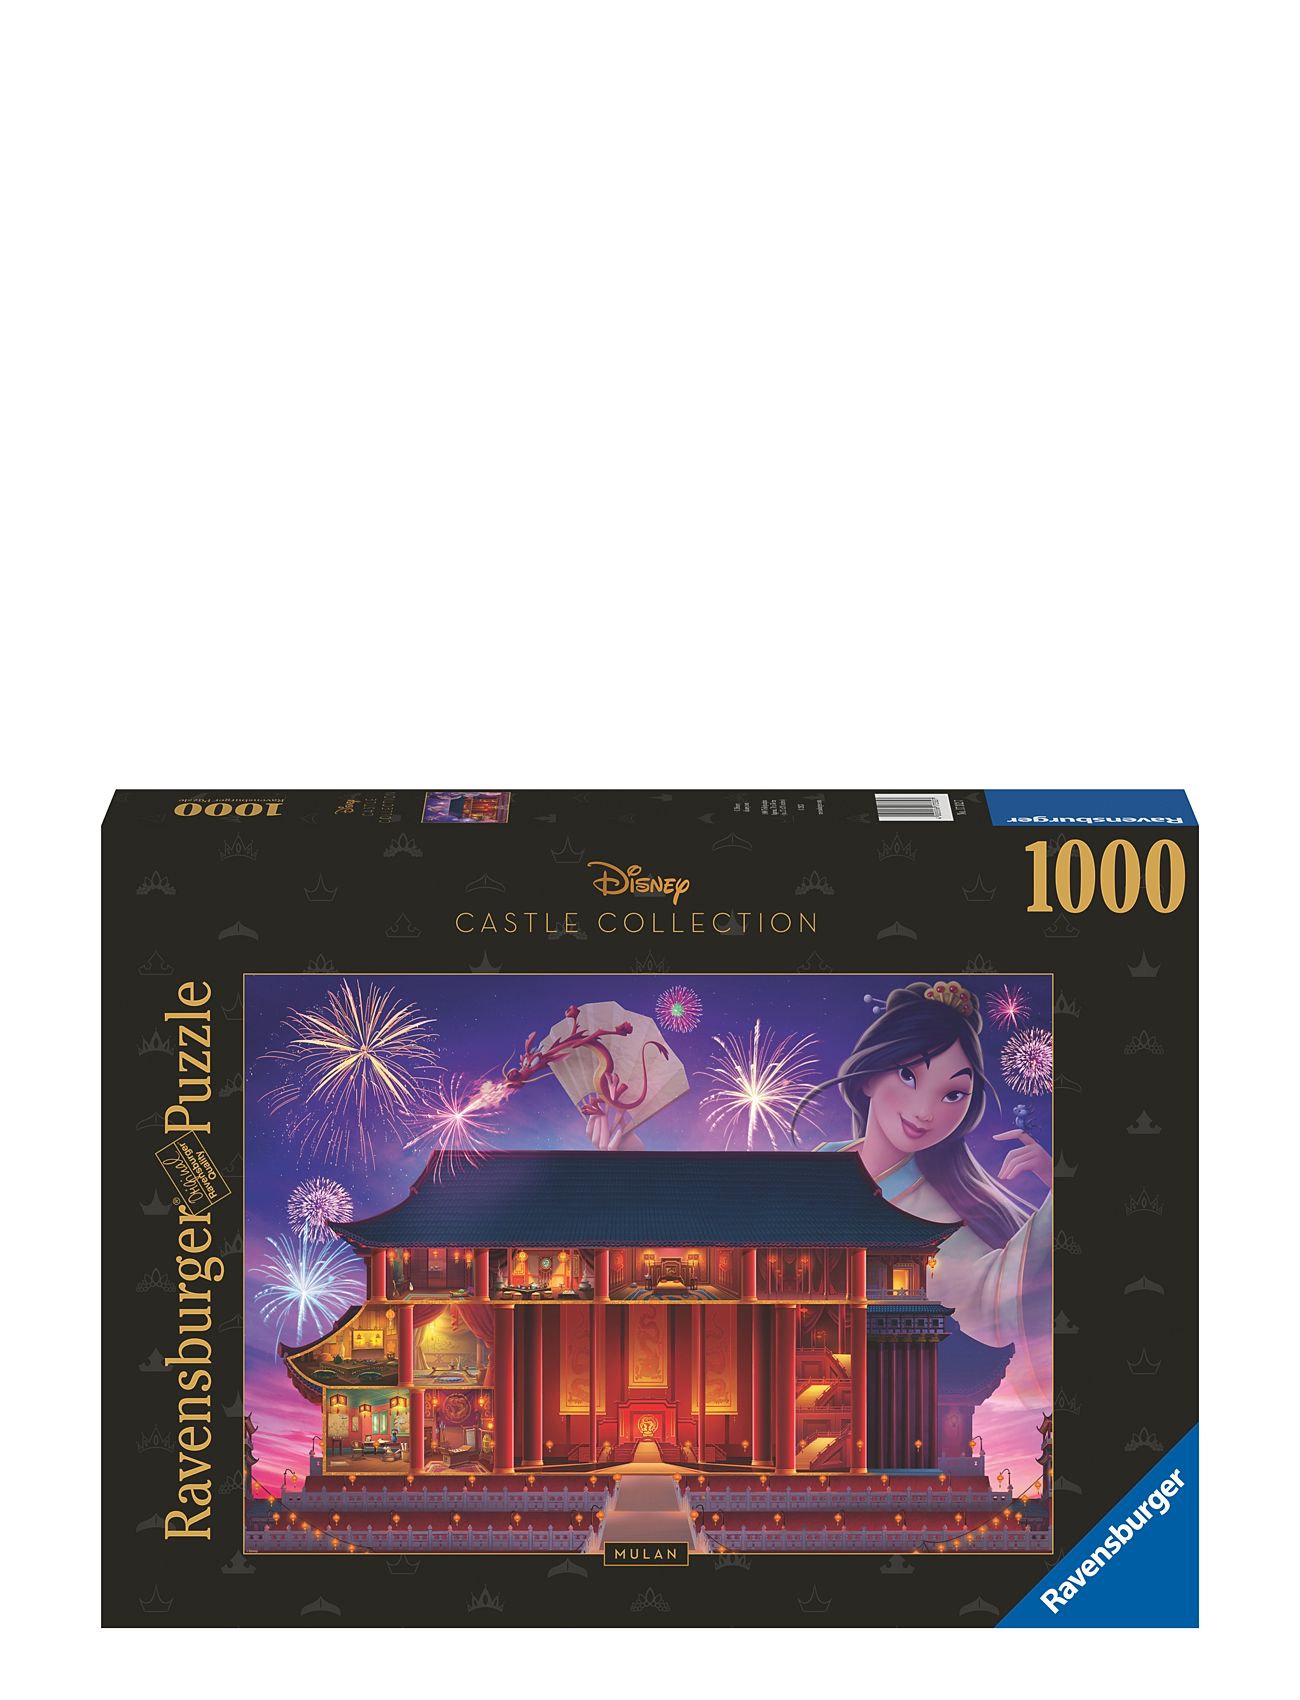 Disney Castles Mulan 1000P Toys Puzzles And Games Puzzles Classic Puzzles Multi/patterned Ravensburger